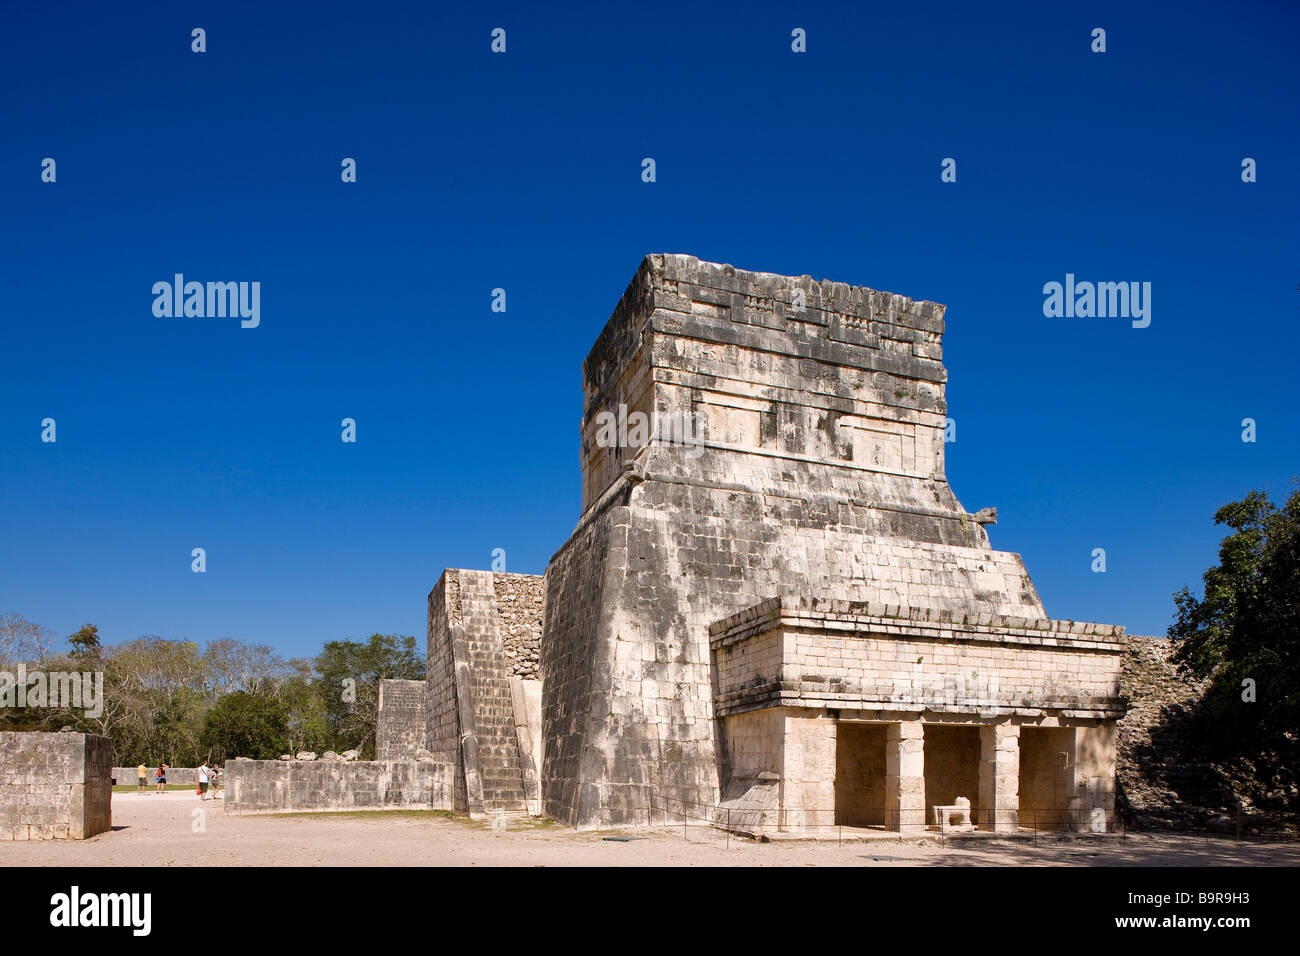 Mexico, Yucatan State, archaeological site of Chichen Itza, classified as World Heritage by UNESCO, the Temple of the Jaguars Stock Photo